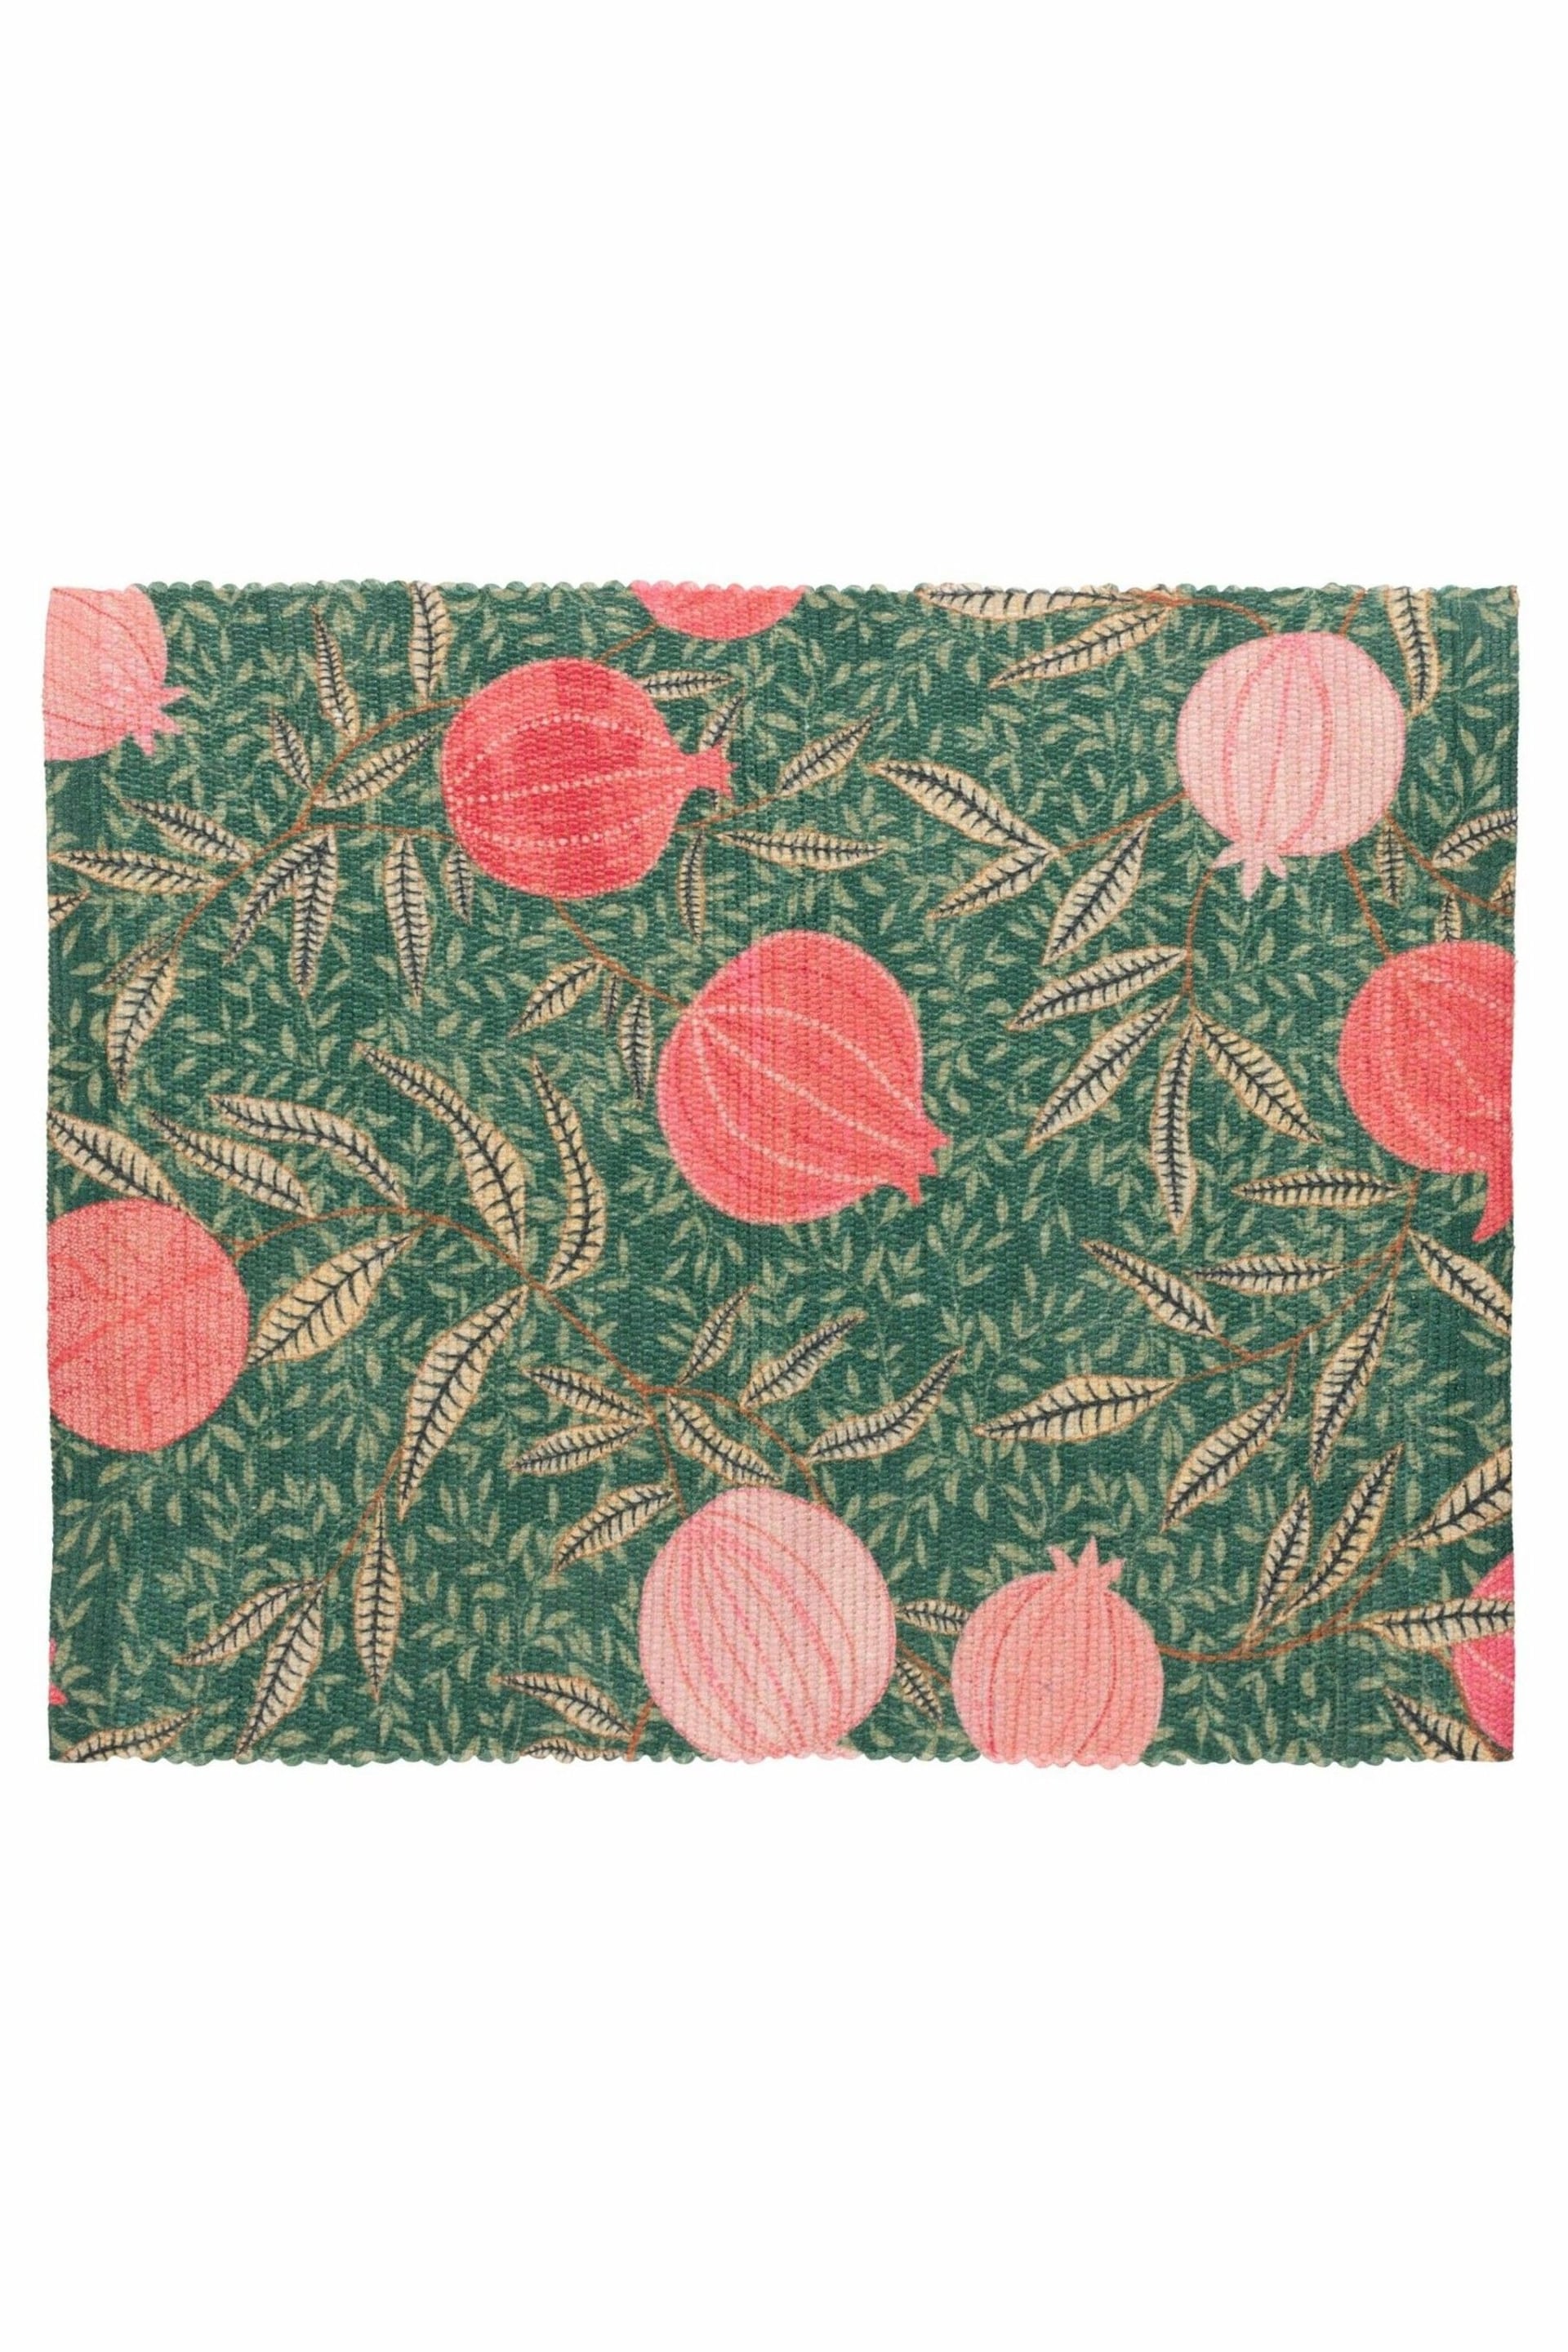 Paoletti Set of 4 Green Pomegranate Table Placemats - Image 5 of 6